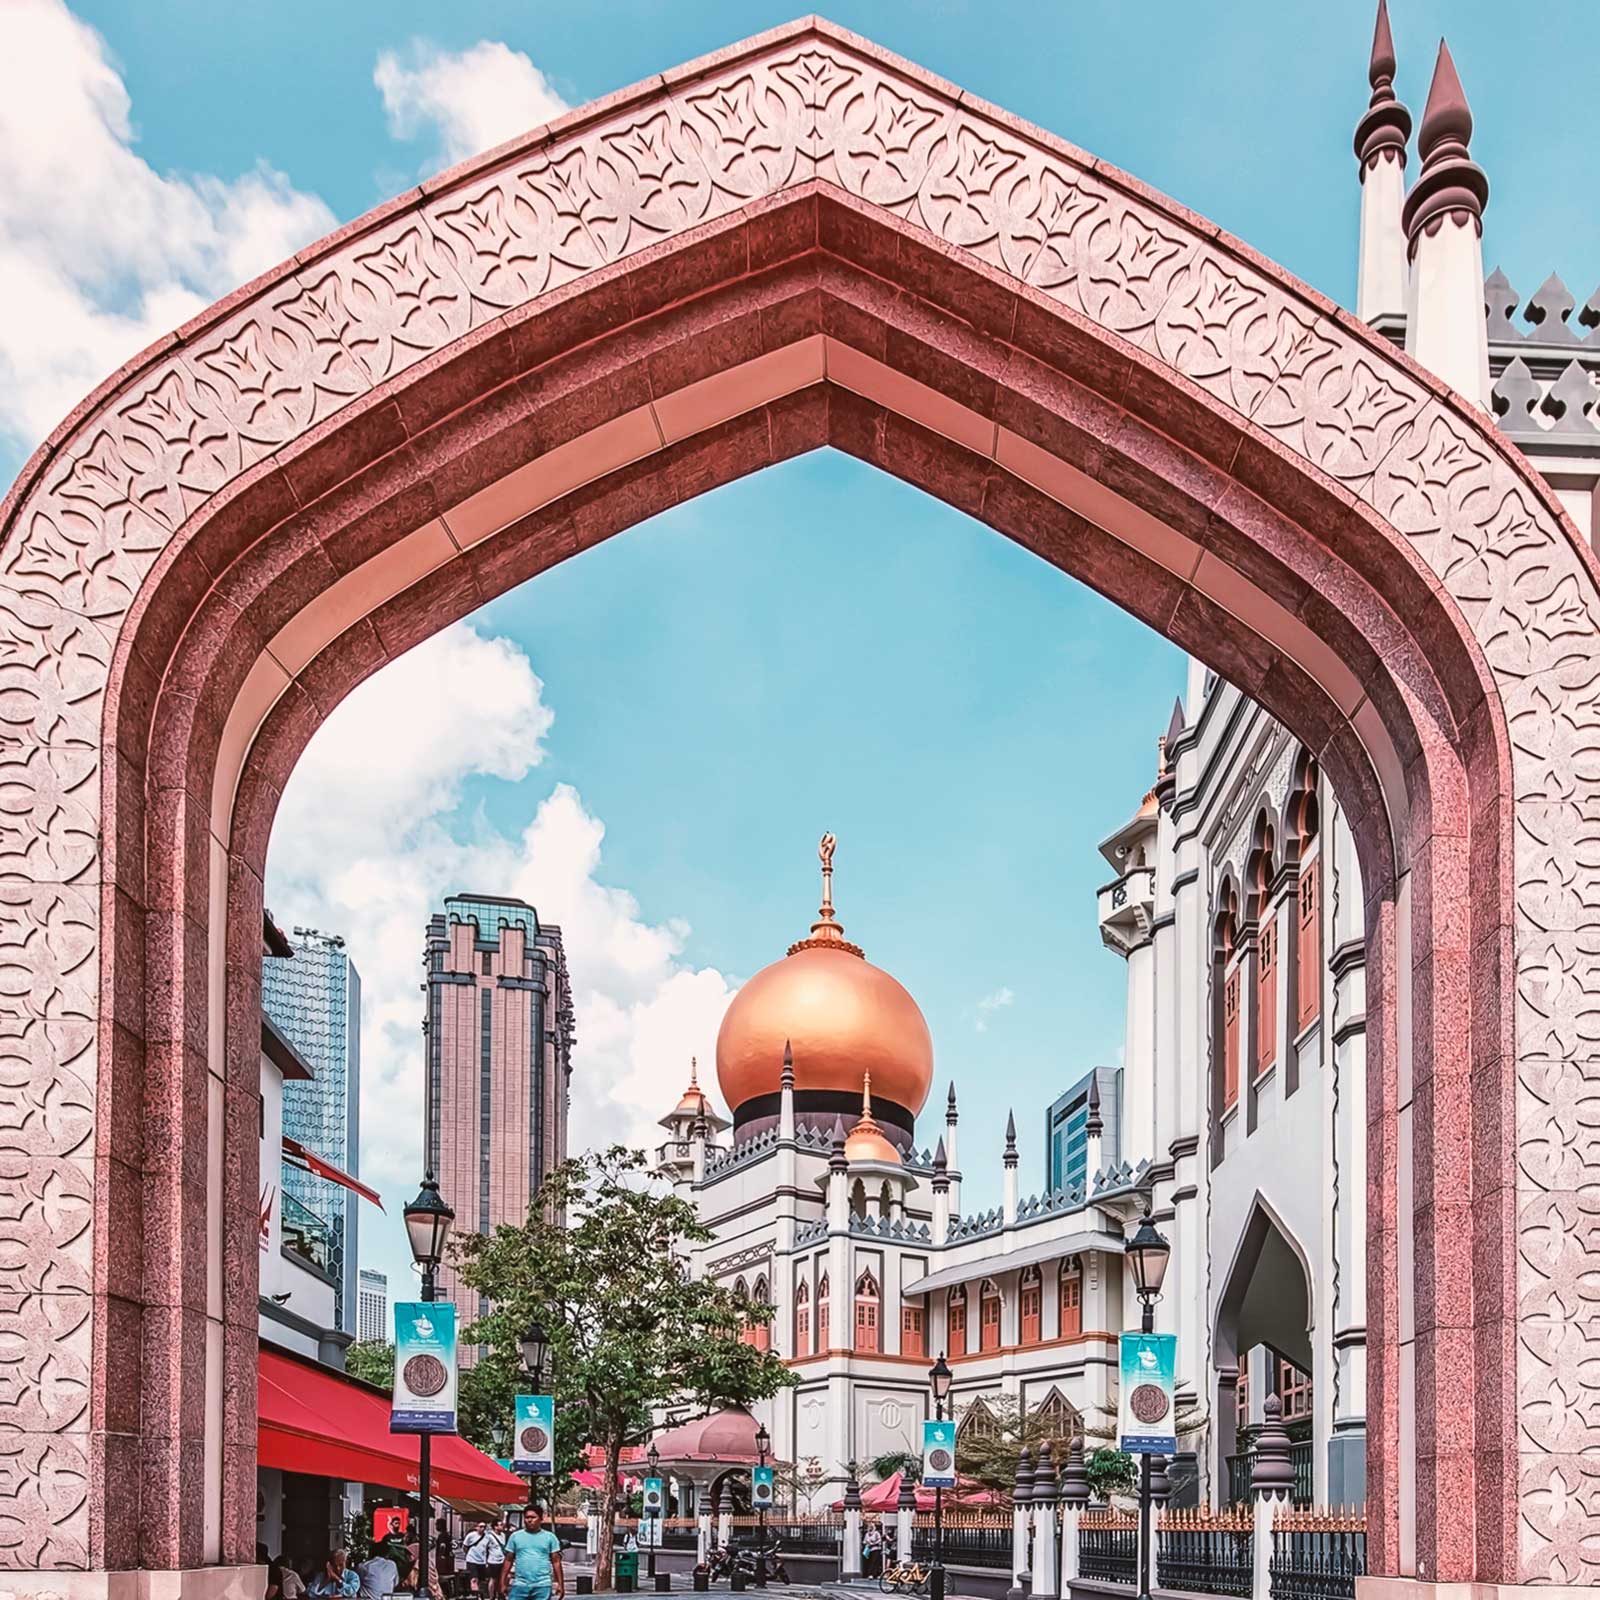 Masjlid Sultan mosque in Muscat Street Singapore